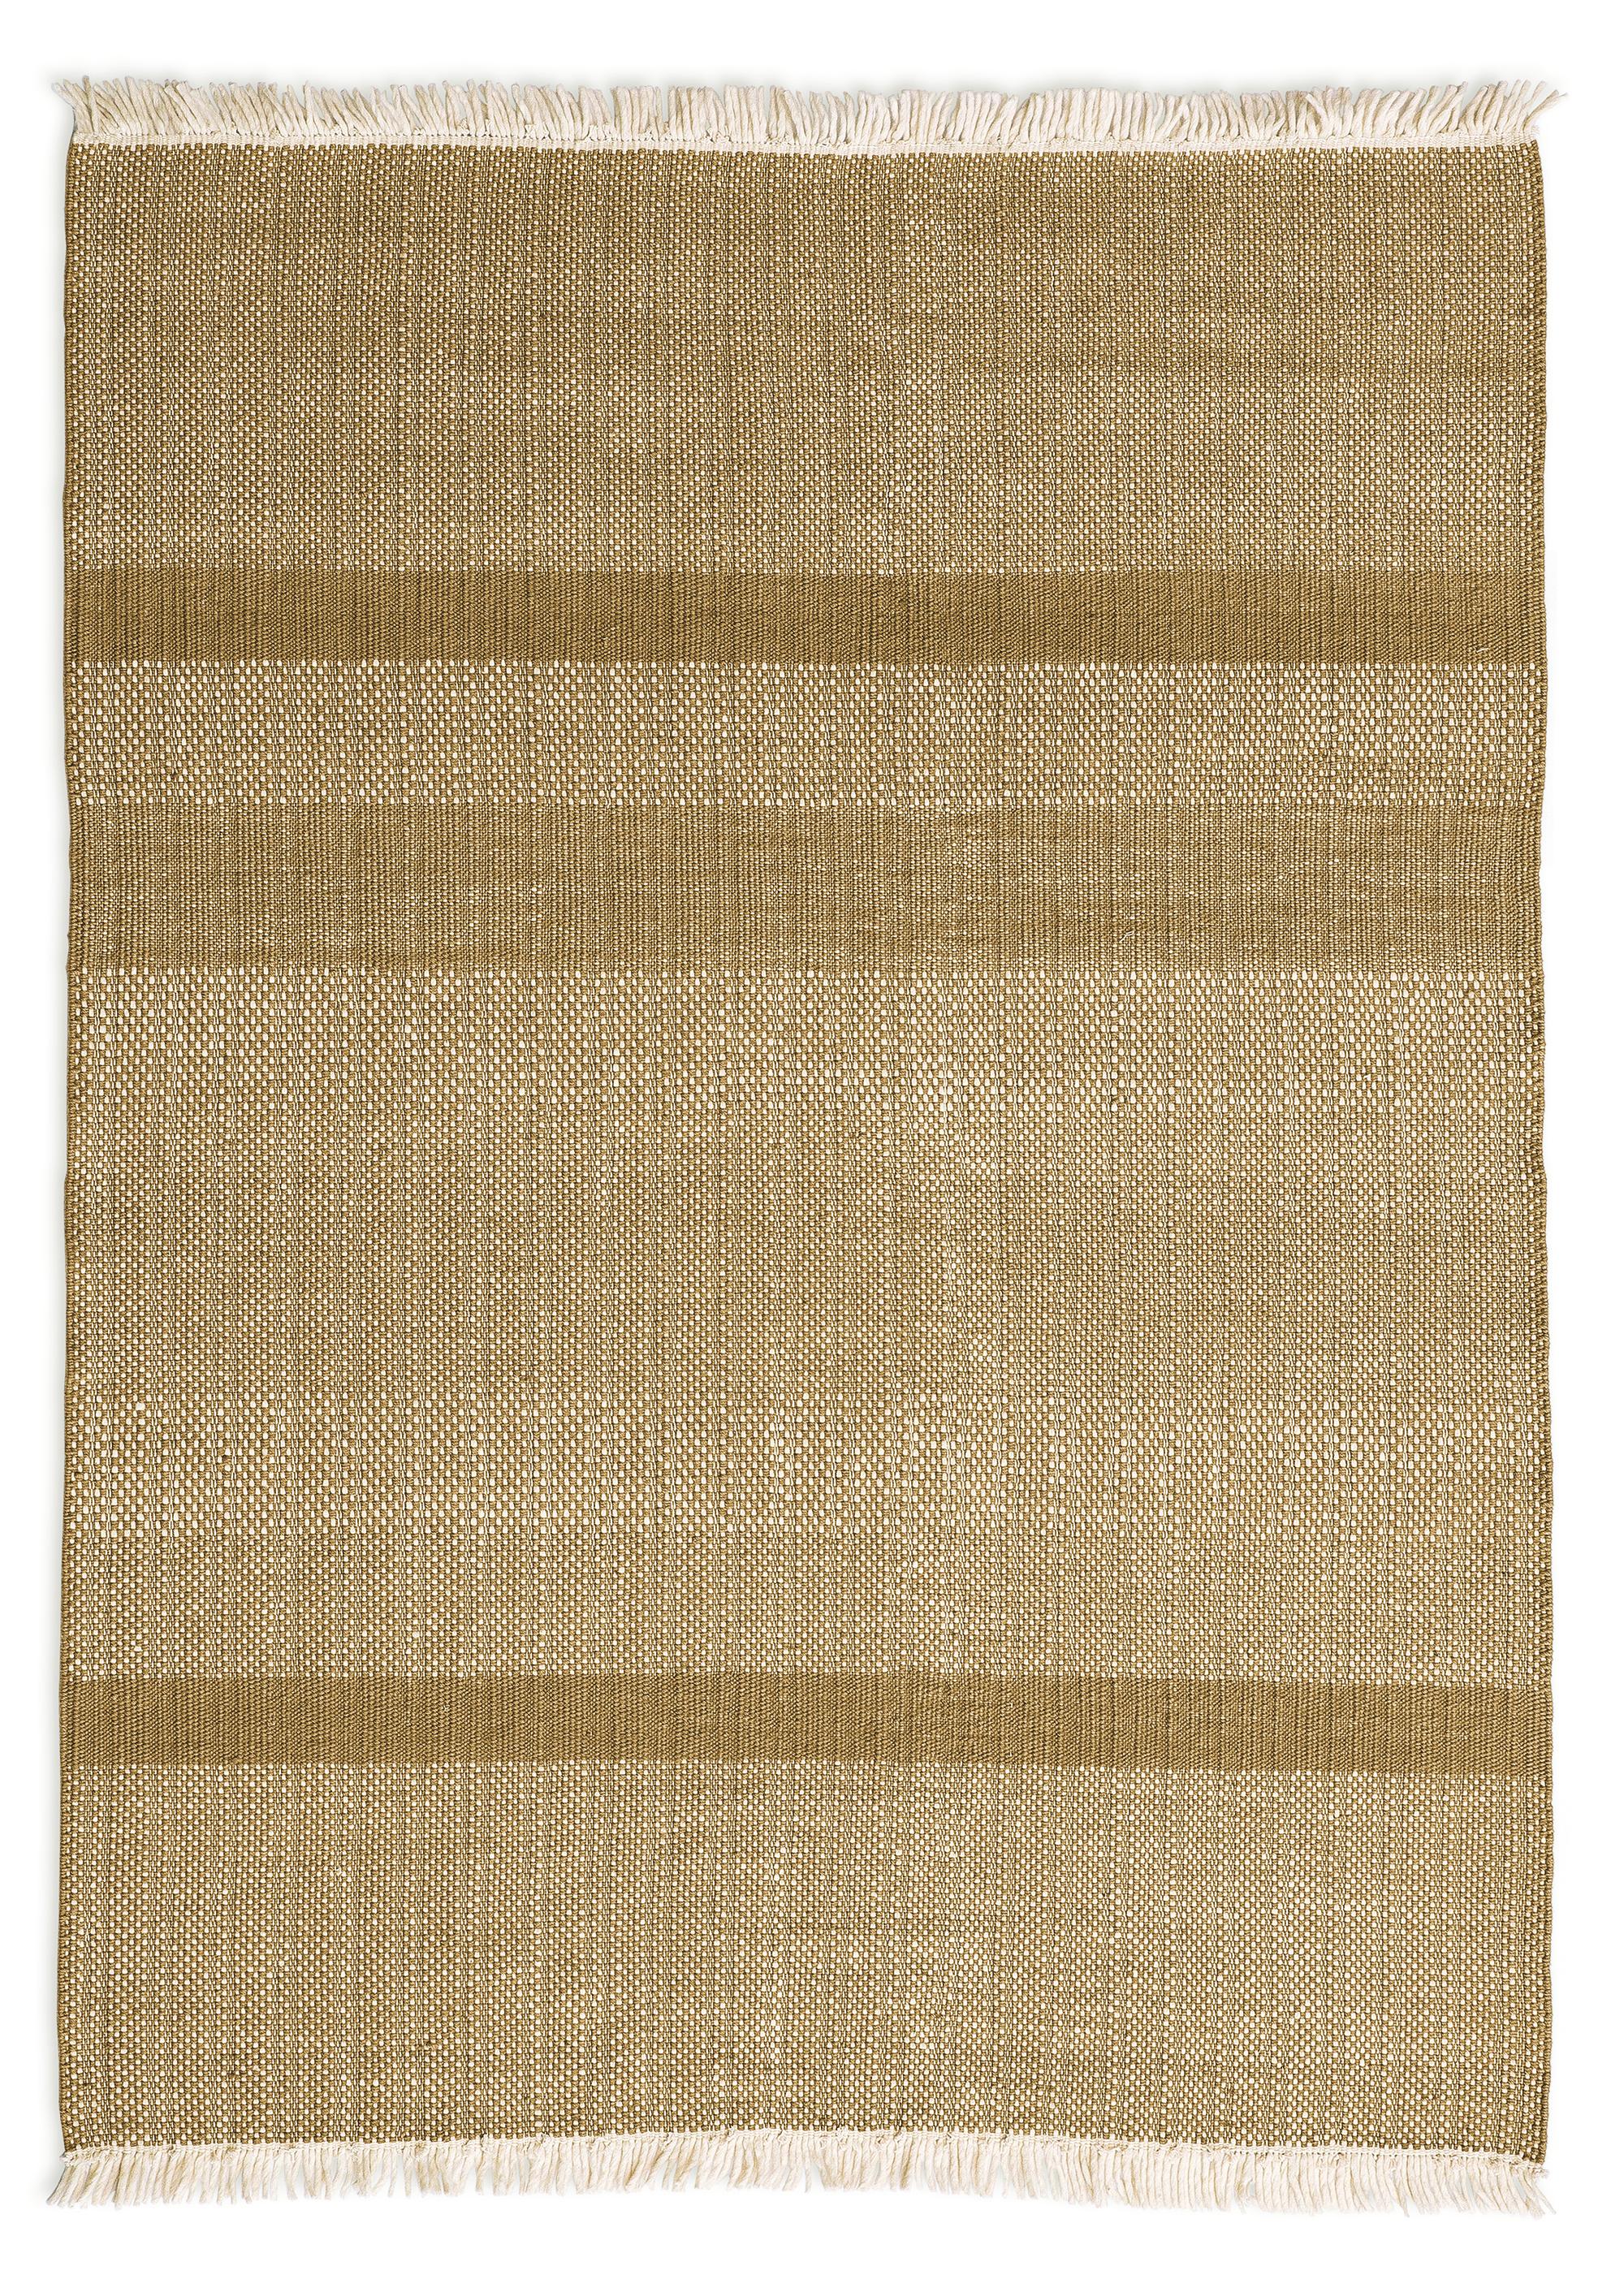 'Tres Texture' Hand-Loomed Rug for Nanimarquina For Sale 2